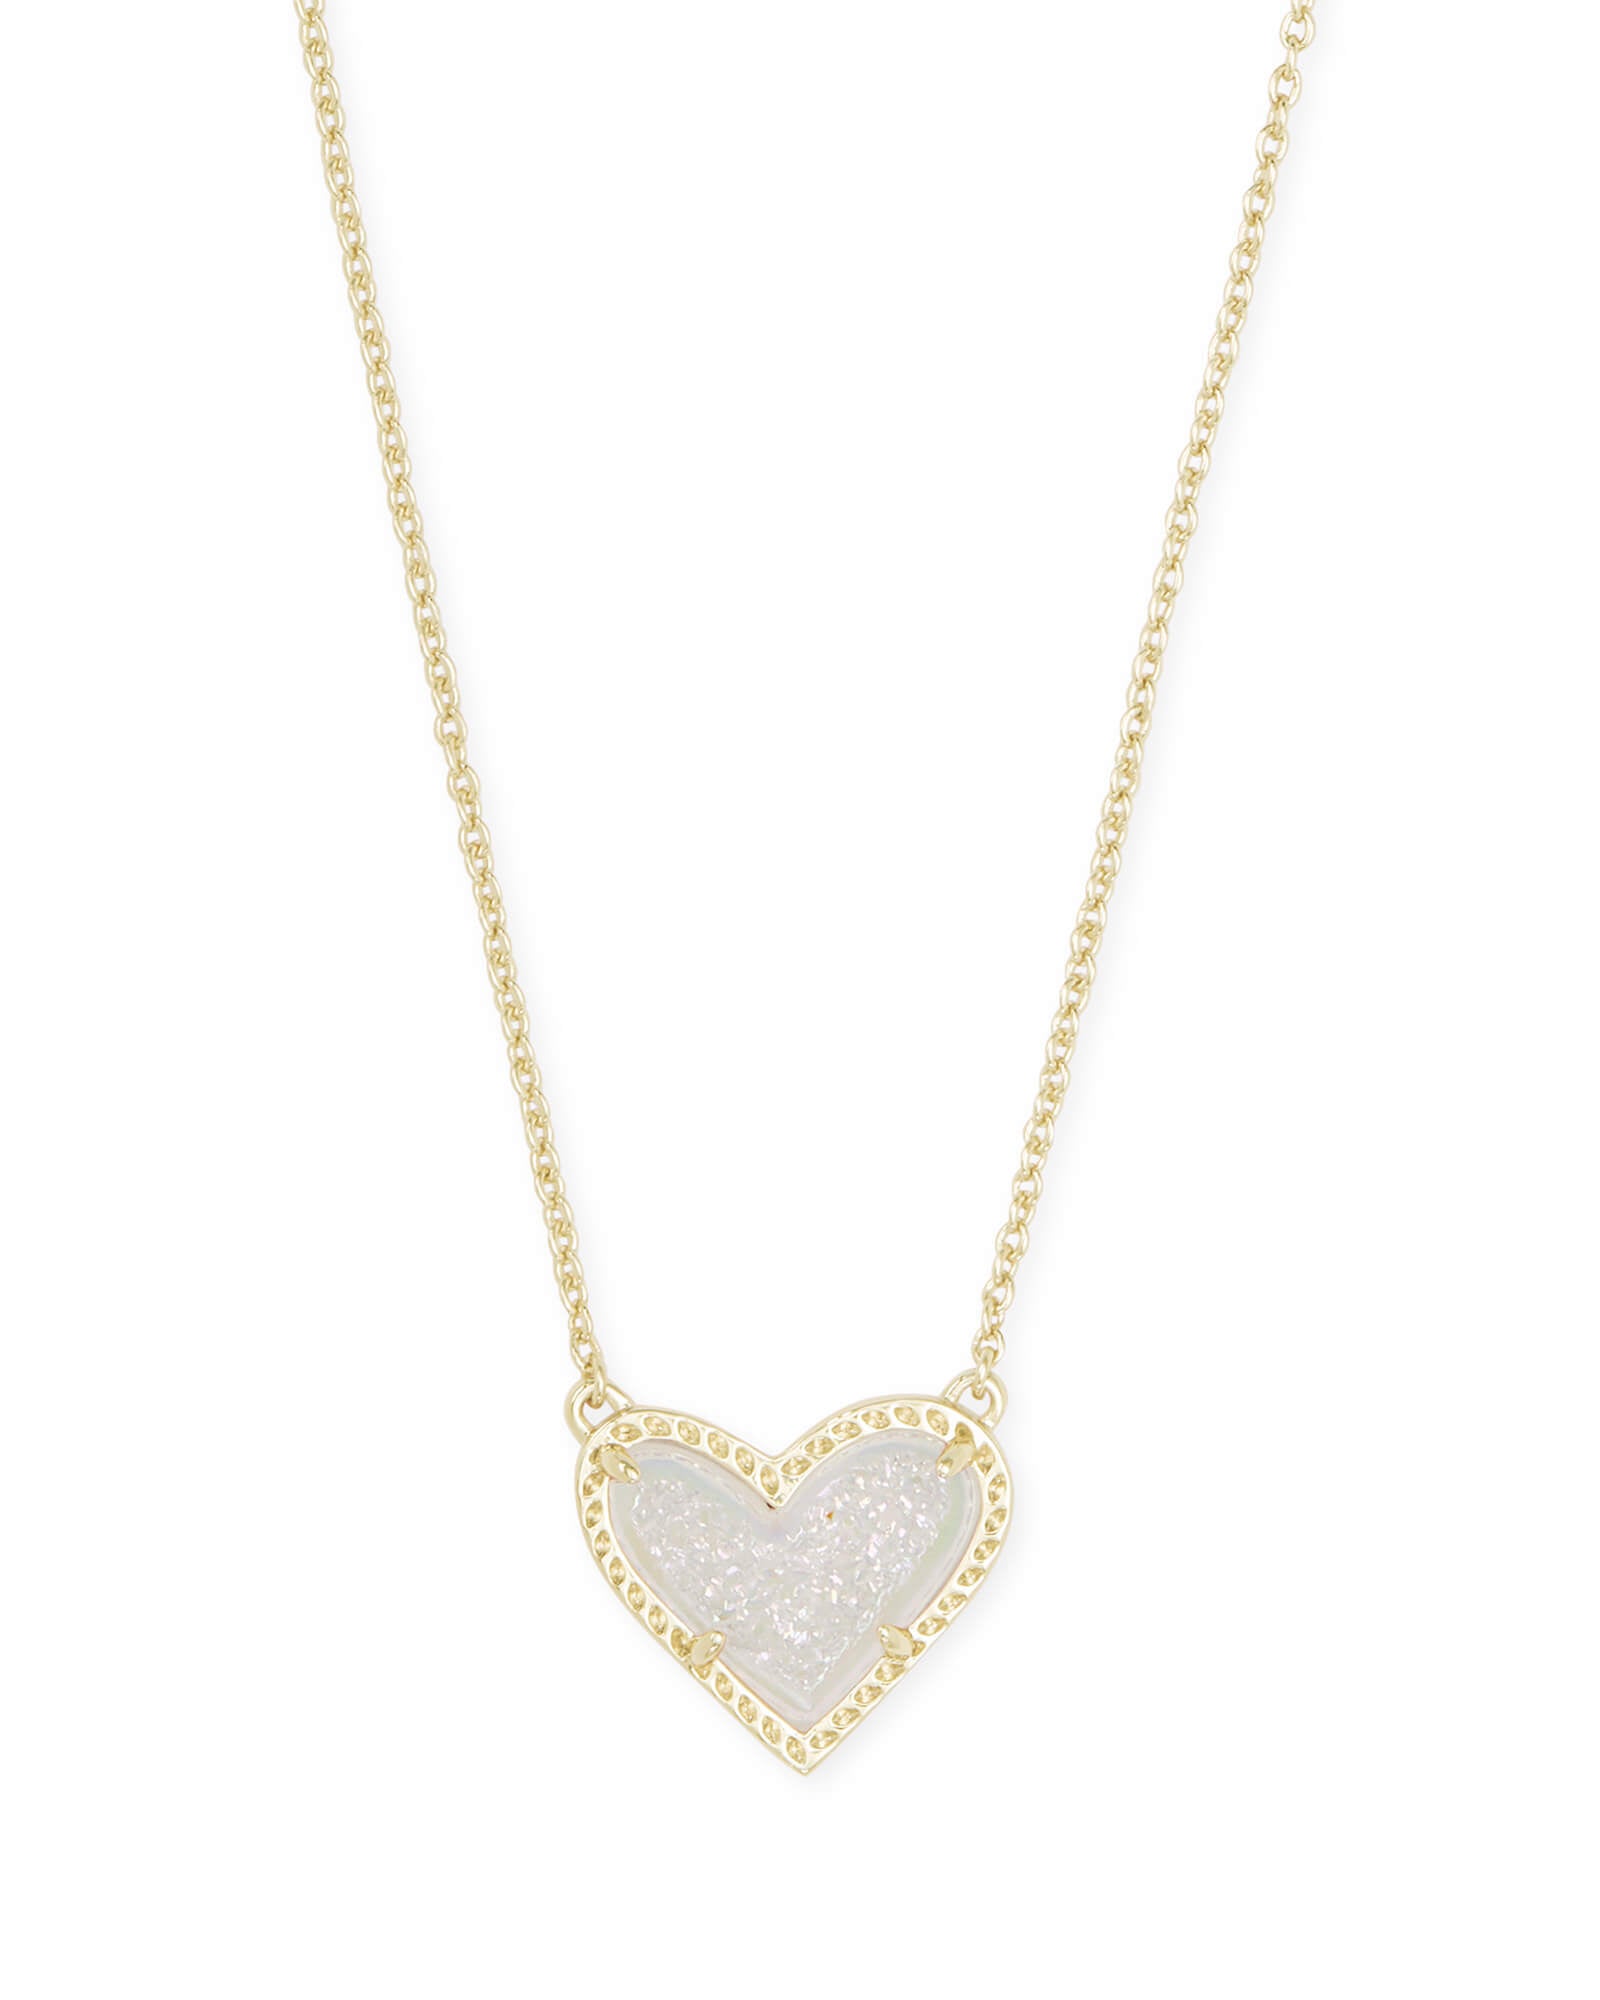 Kendra Scott Ari Heart Pendant Necklace in Iridescent Drusy and Gold